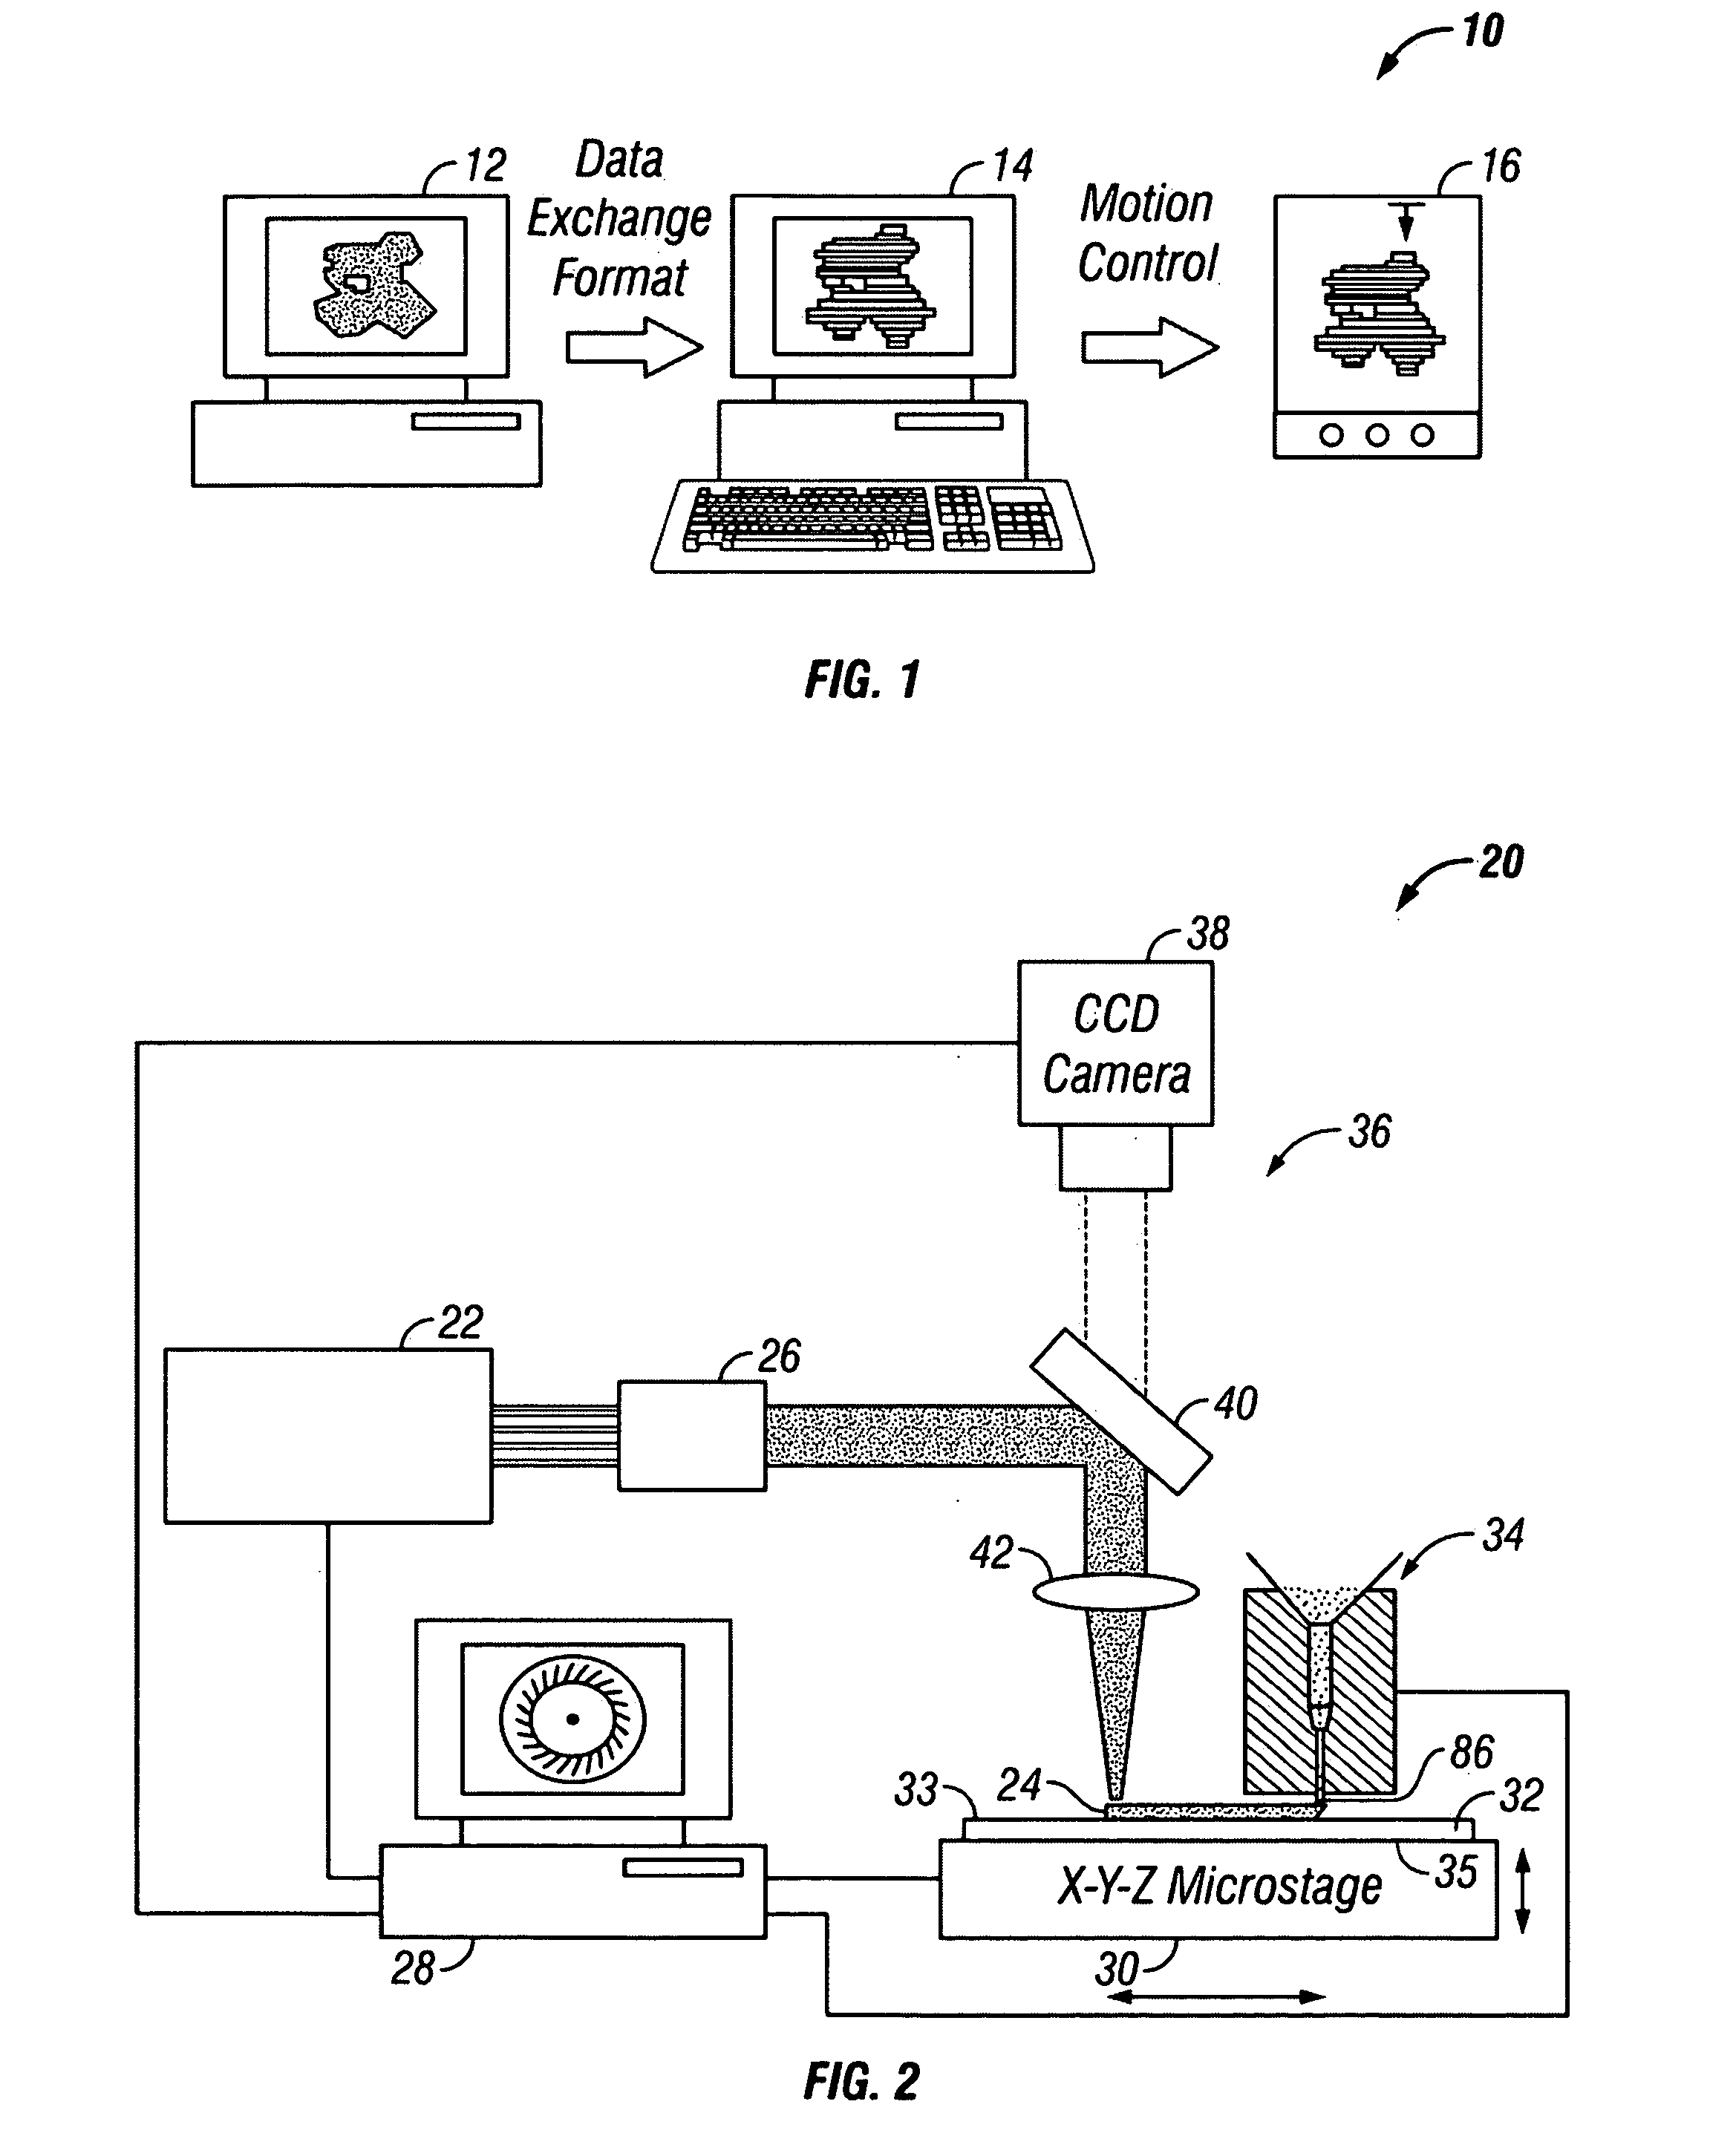 Apparatus and method of dispensing small-scale powders